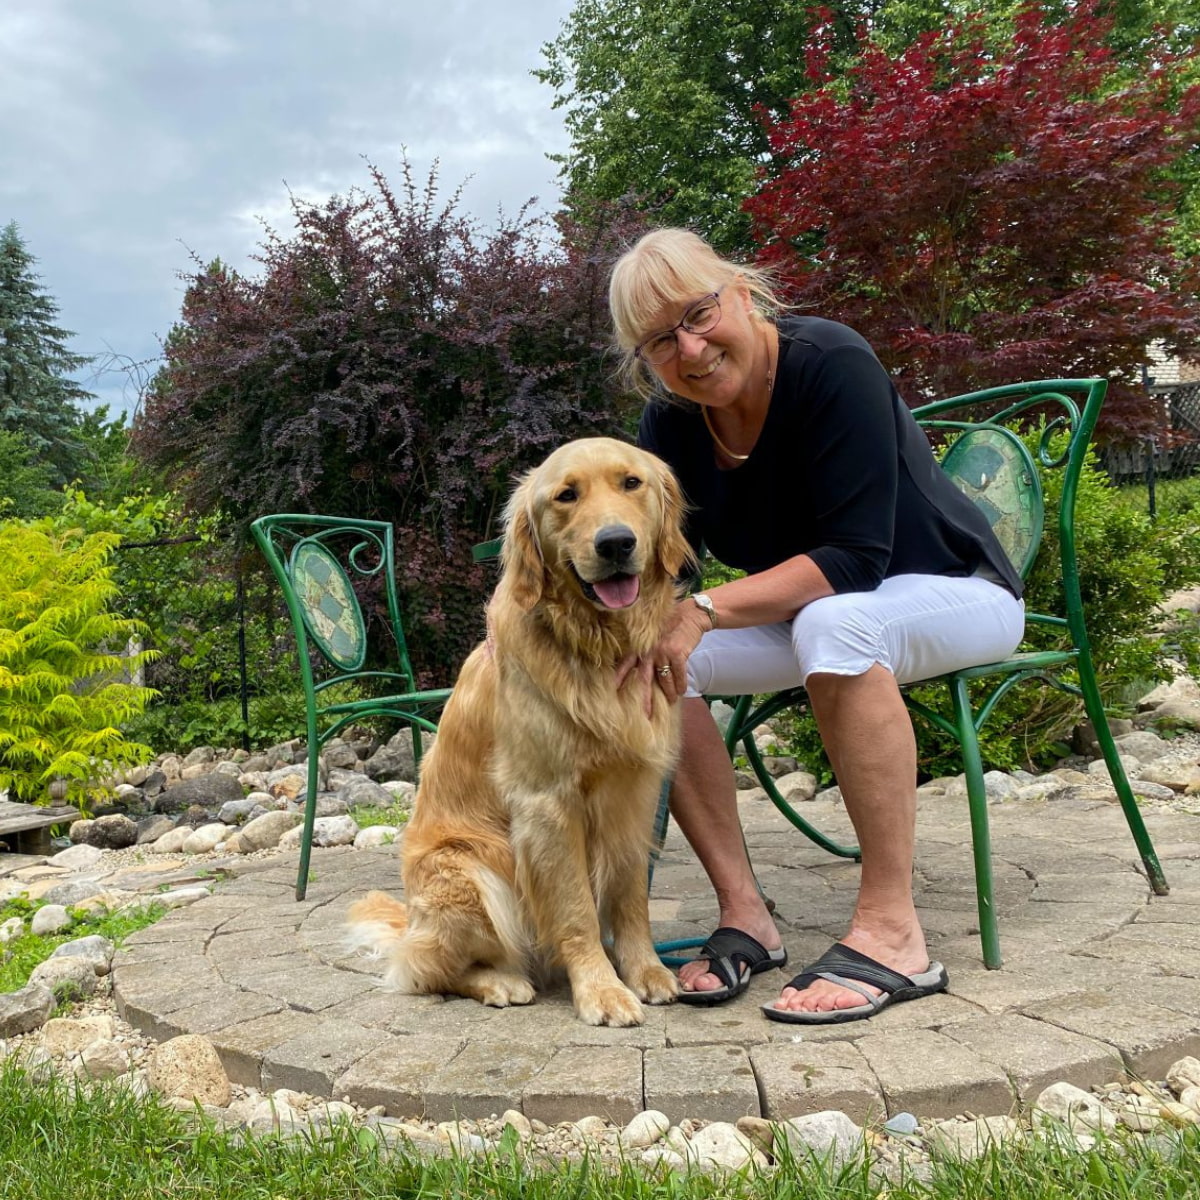 A woman with blonde hair sitting in a chair outside with a golden retriever sitting next to her